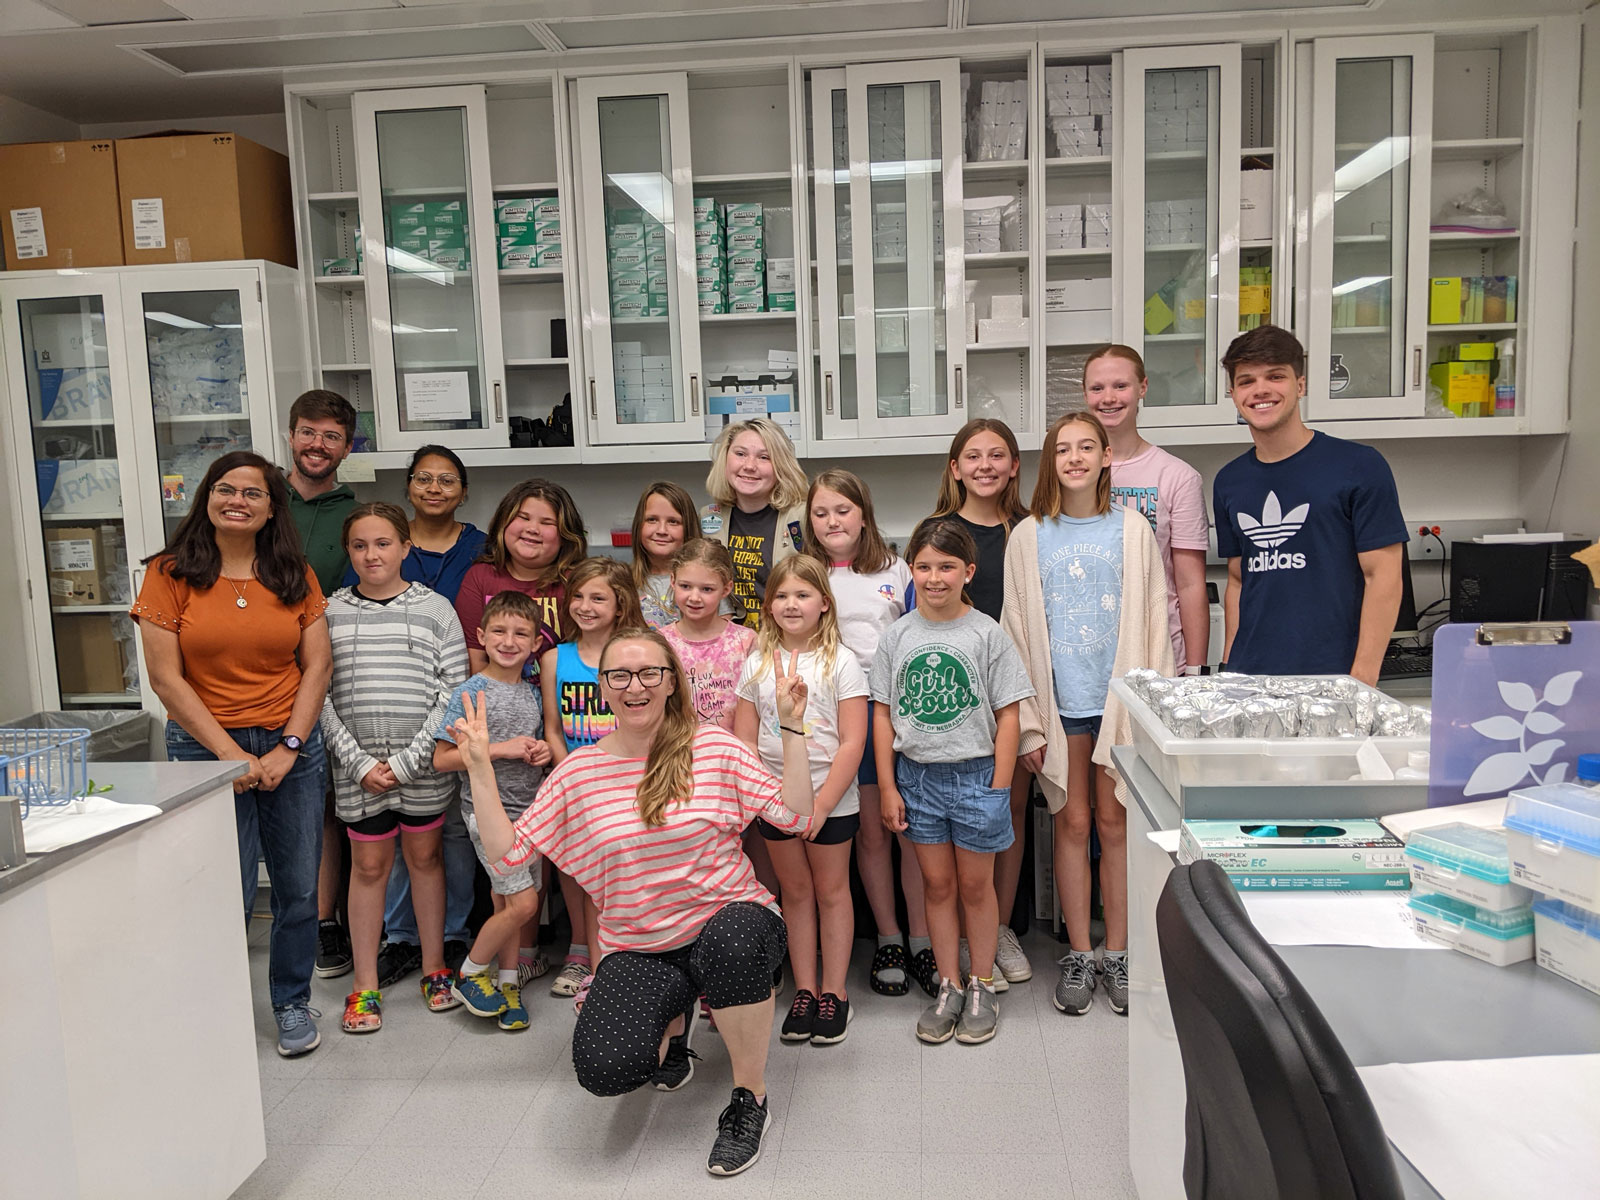 Dr. Katarzyna Glowacka's lab hosted an event with 12 Girl Scouts from across Nebraska.